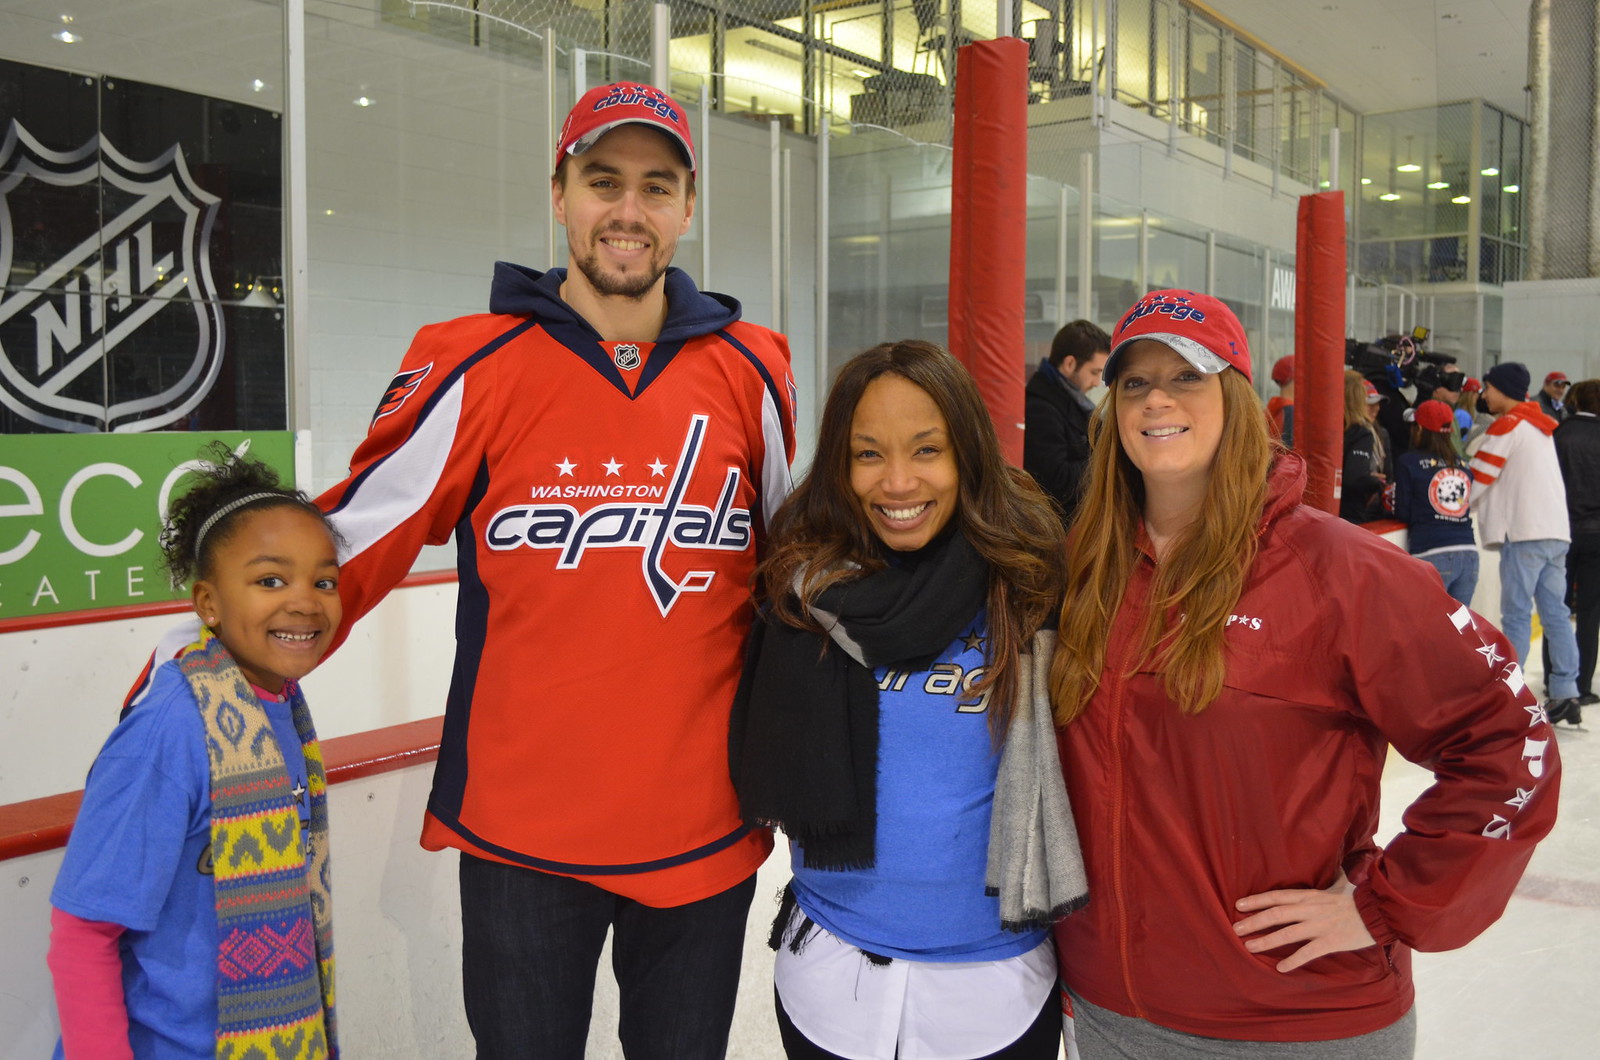 2016_T4T_Skate with Washington Capitals 47